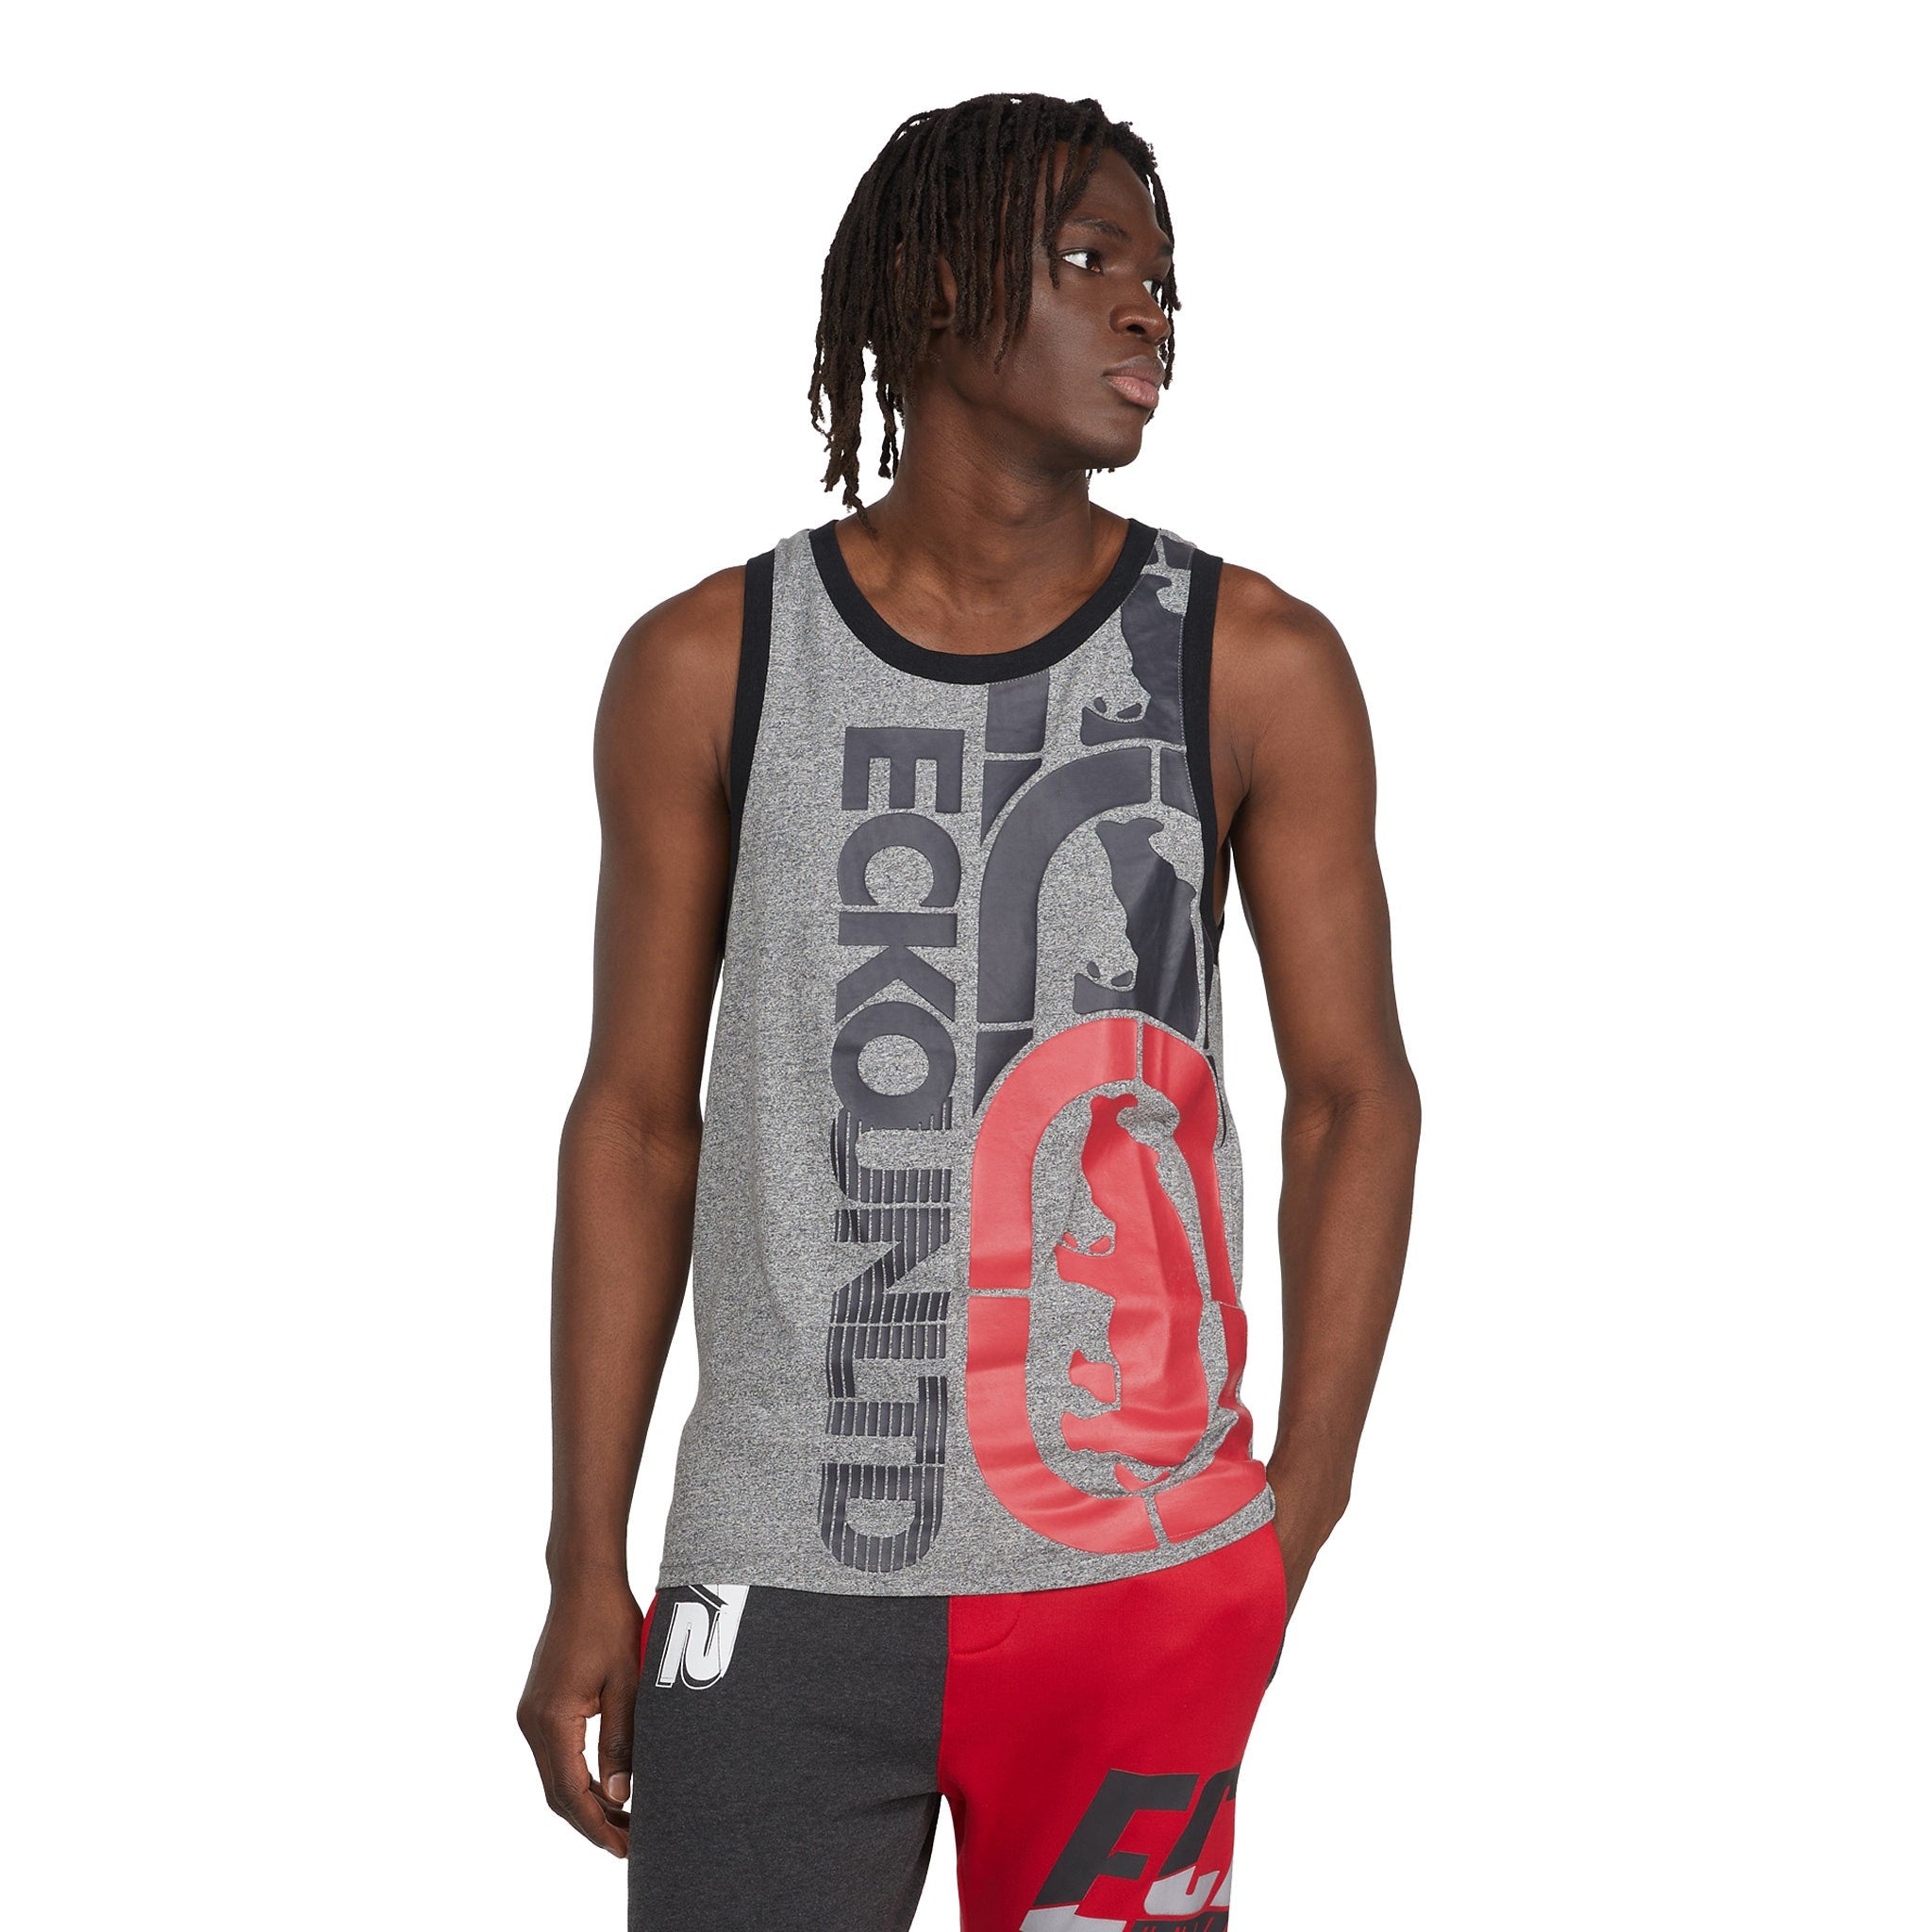 Stand Up Tank Top